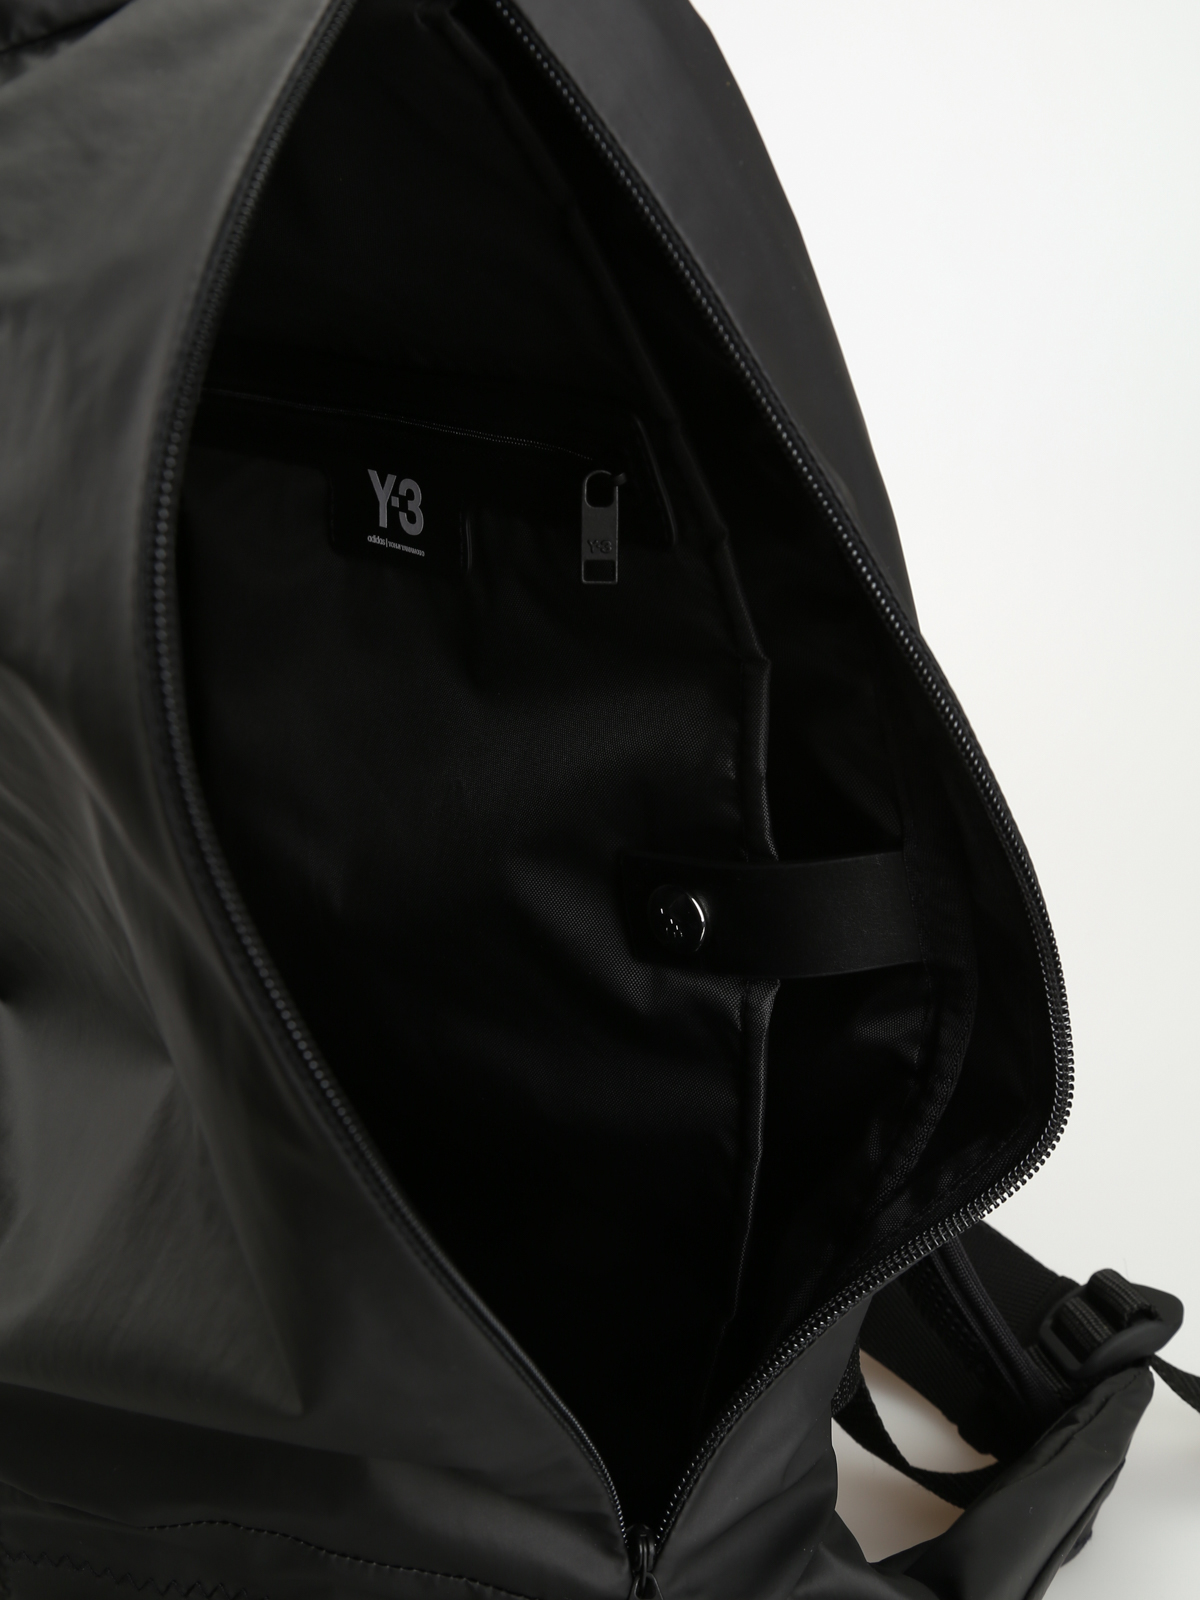 Adidas Y-3 - Bungee backpack - backpacks - DY0538 | Shop online at iKRIX